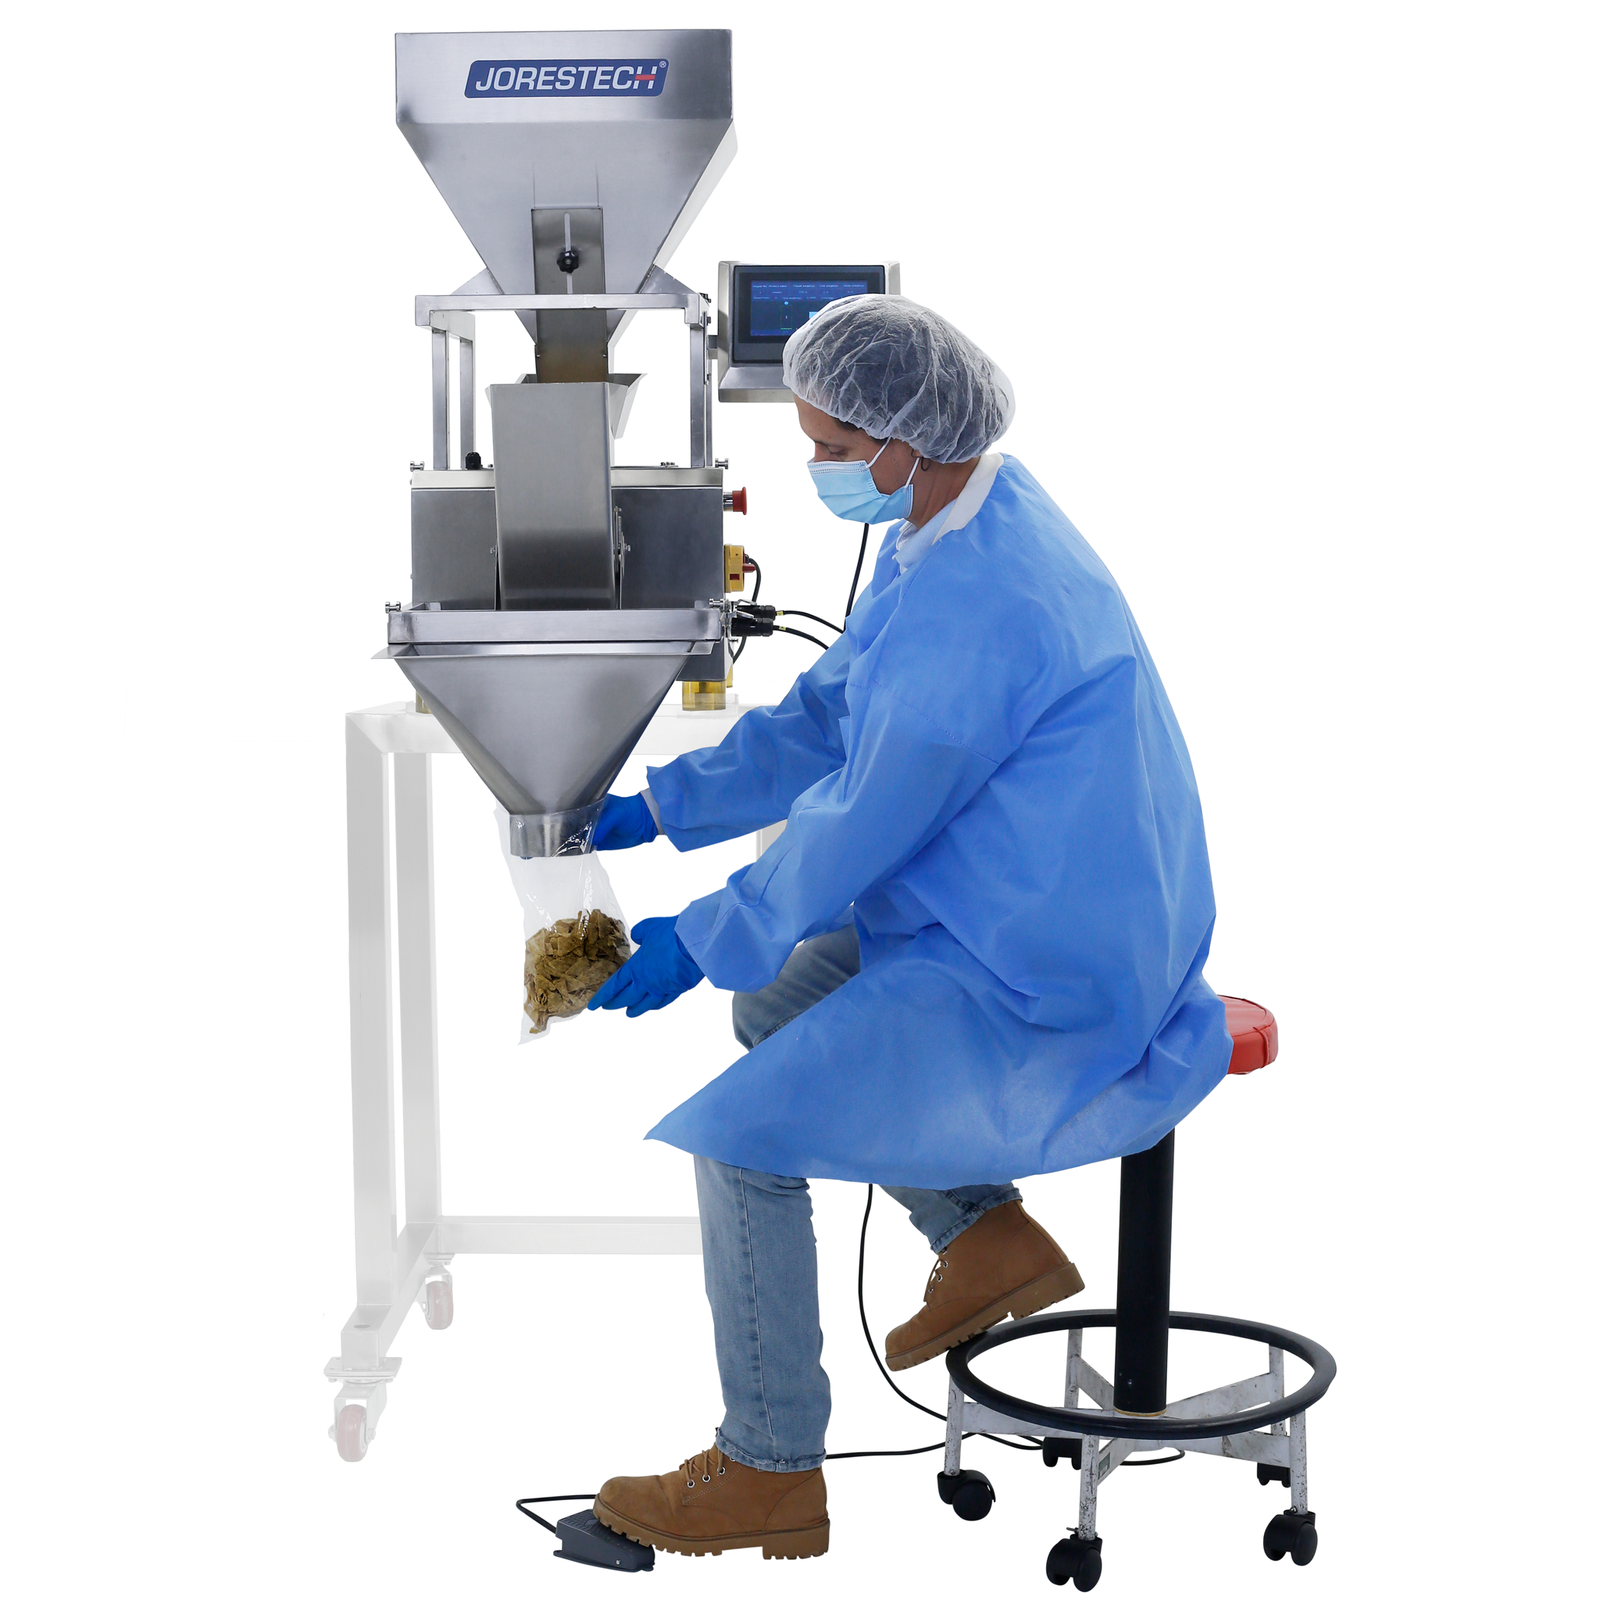 operator wearing a blue PPE gown, a face mask and gloves can be seen sitting on a chair and using the foot pedal to command the JORESTECH linear weighing machine to dispense product into a bag. The machine can be seen placed on top of a stand, specifically built for this machine, which can be optionally purchased.